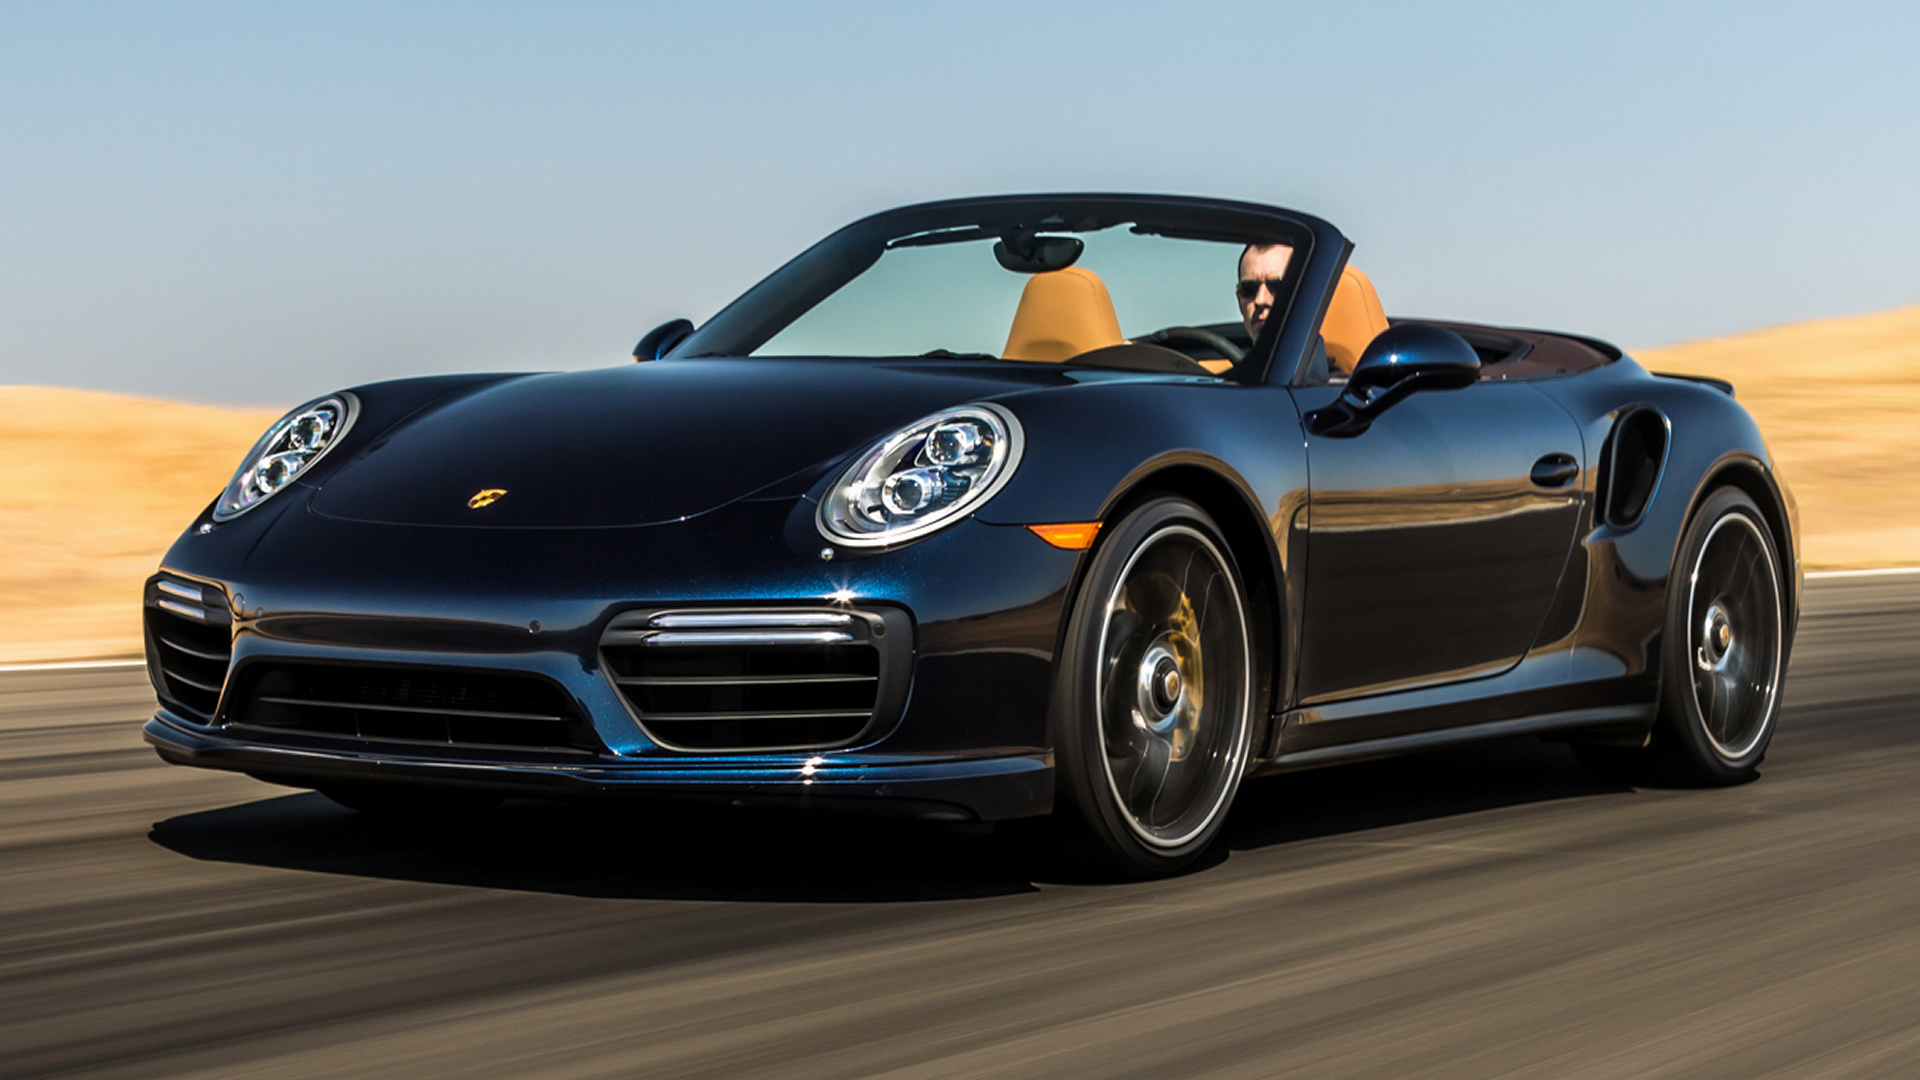 Porsche 911 Turbo S Cabriolet (2017) US Wallpapers and HD